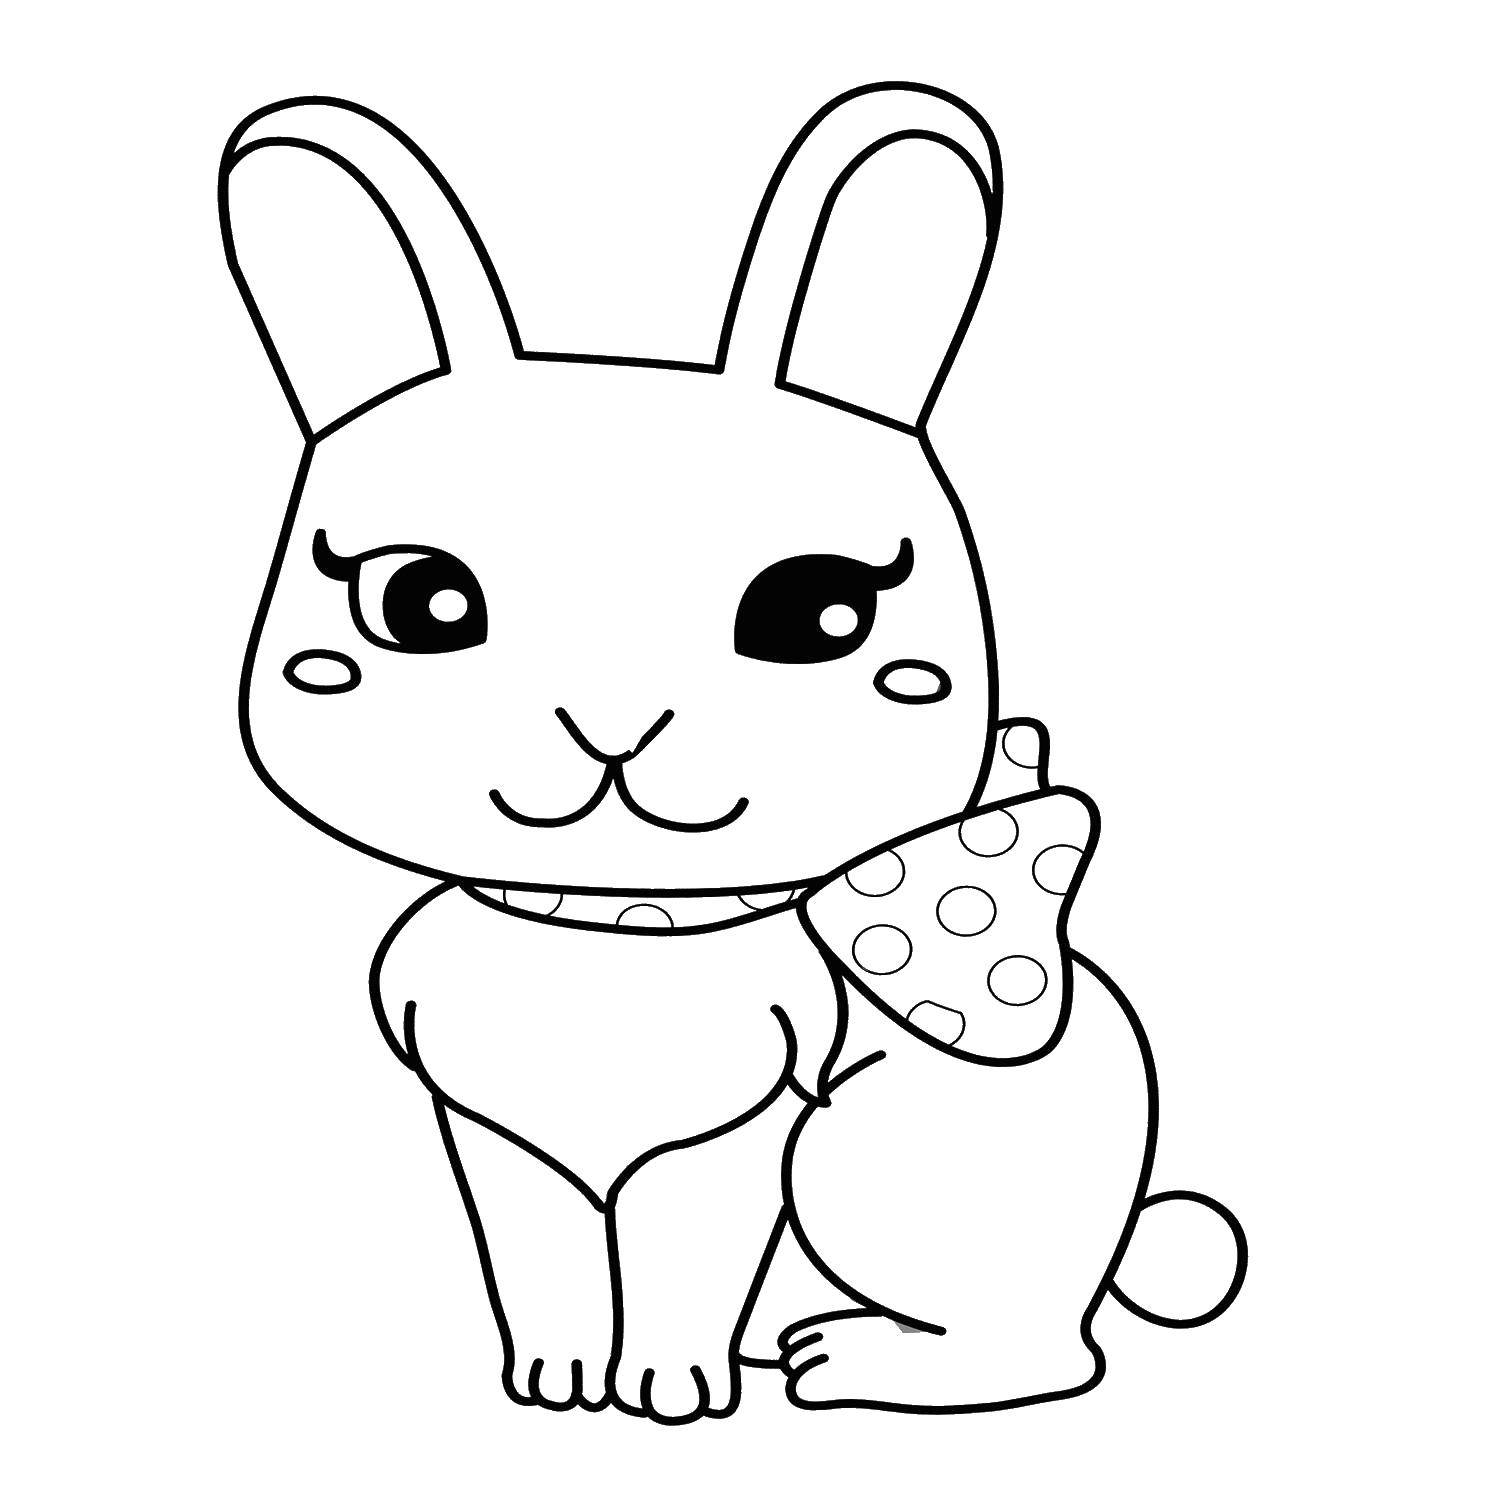 Coloring Rabbit with a bow. Category the rabbit. Tags:  Bunny, bow.